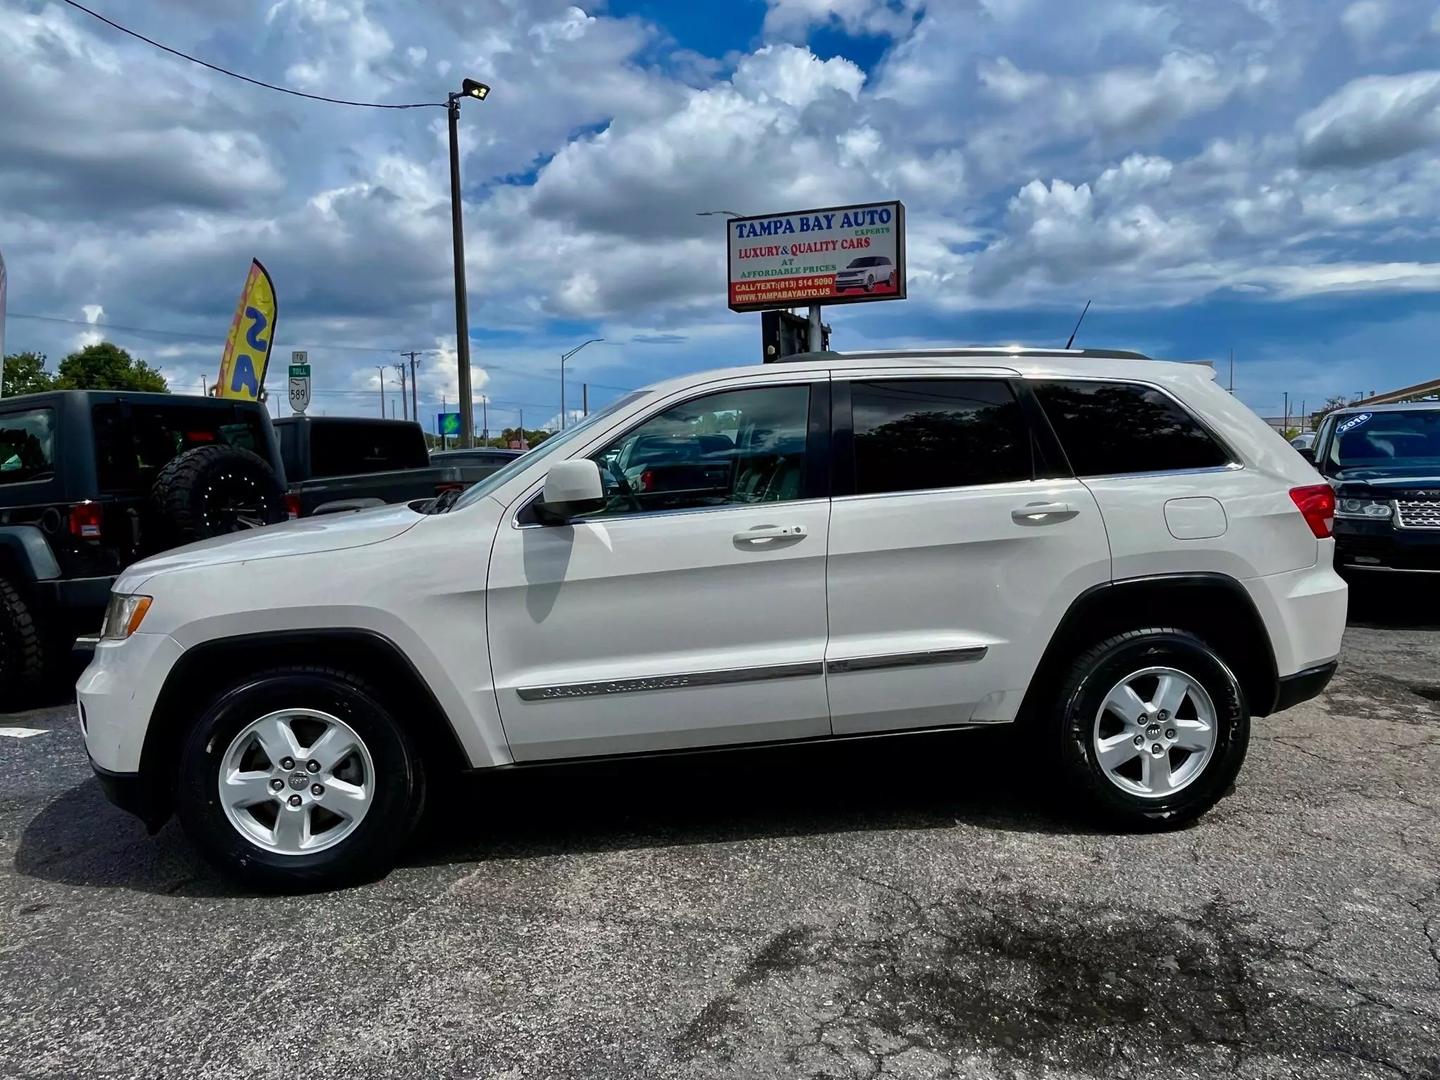 Used 2011 Jeep Grand Cherokee Laredo with VIN 1J4RS4GGXBC515790 for sale in Tampa, FL